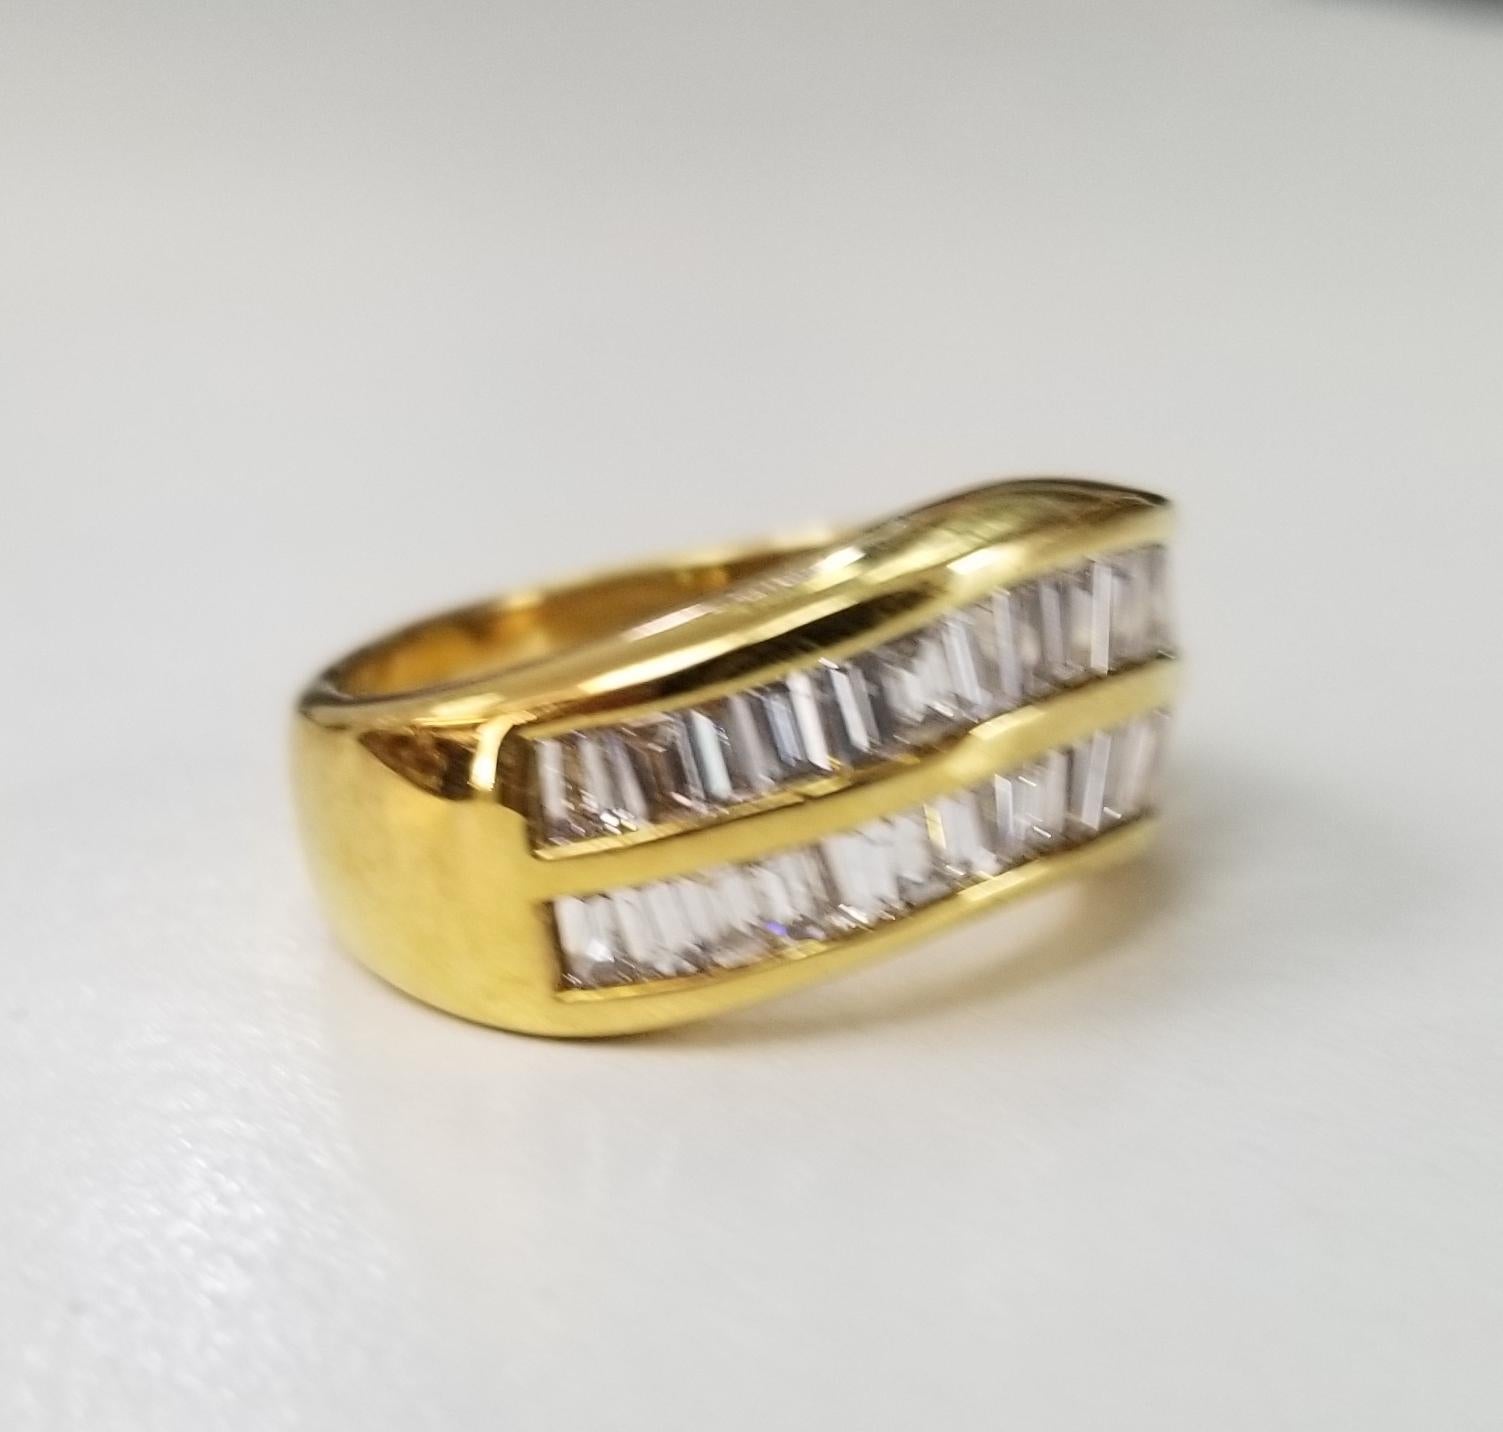 18 karat yellow gold 2 row diamond baguette channel set ring, containing 32 baguette cut diamonds of very fine quality weighing 1.50cts.  This ring is a size 5.5 but we will size to fit for free.